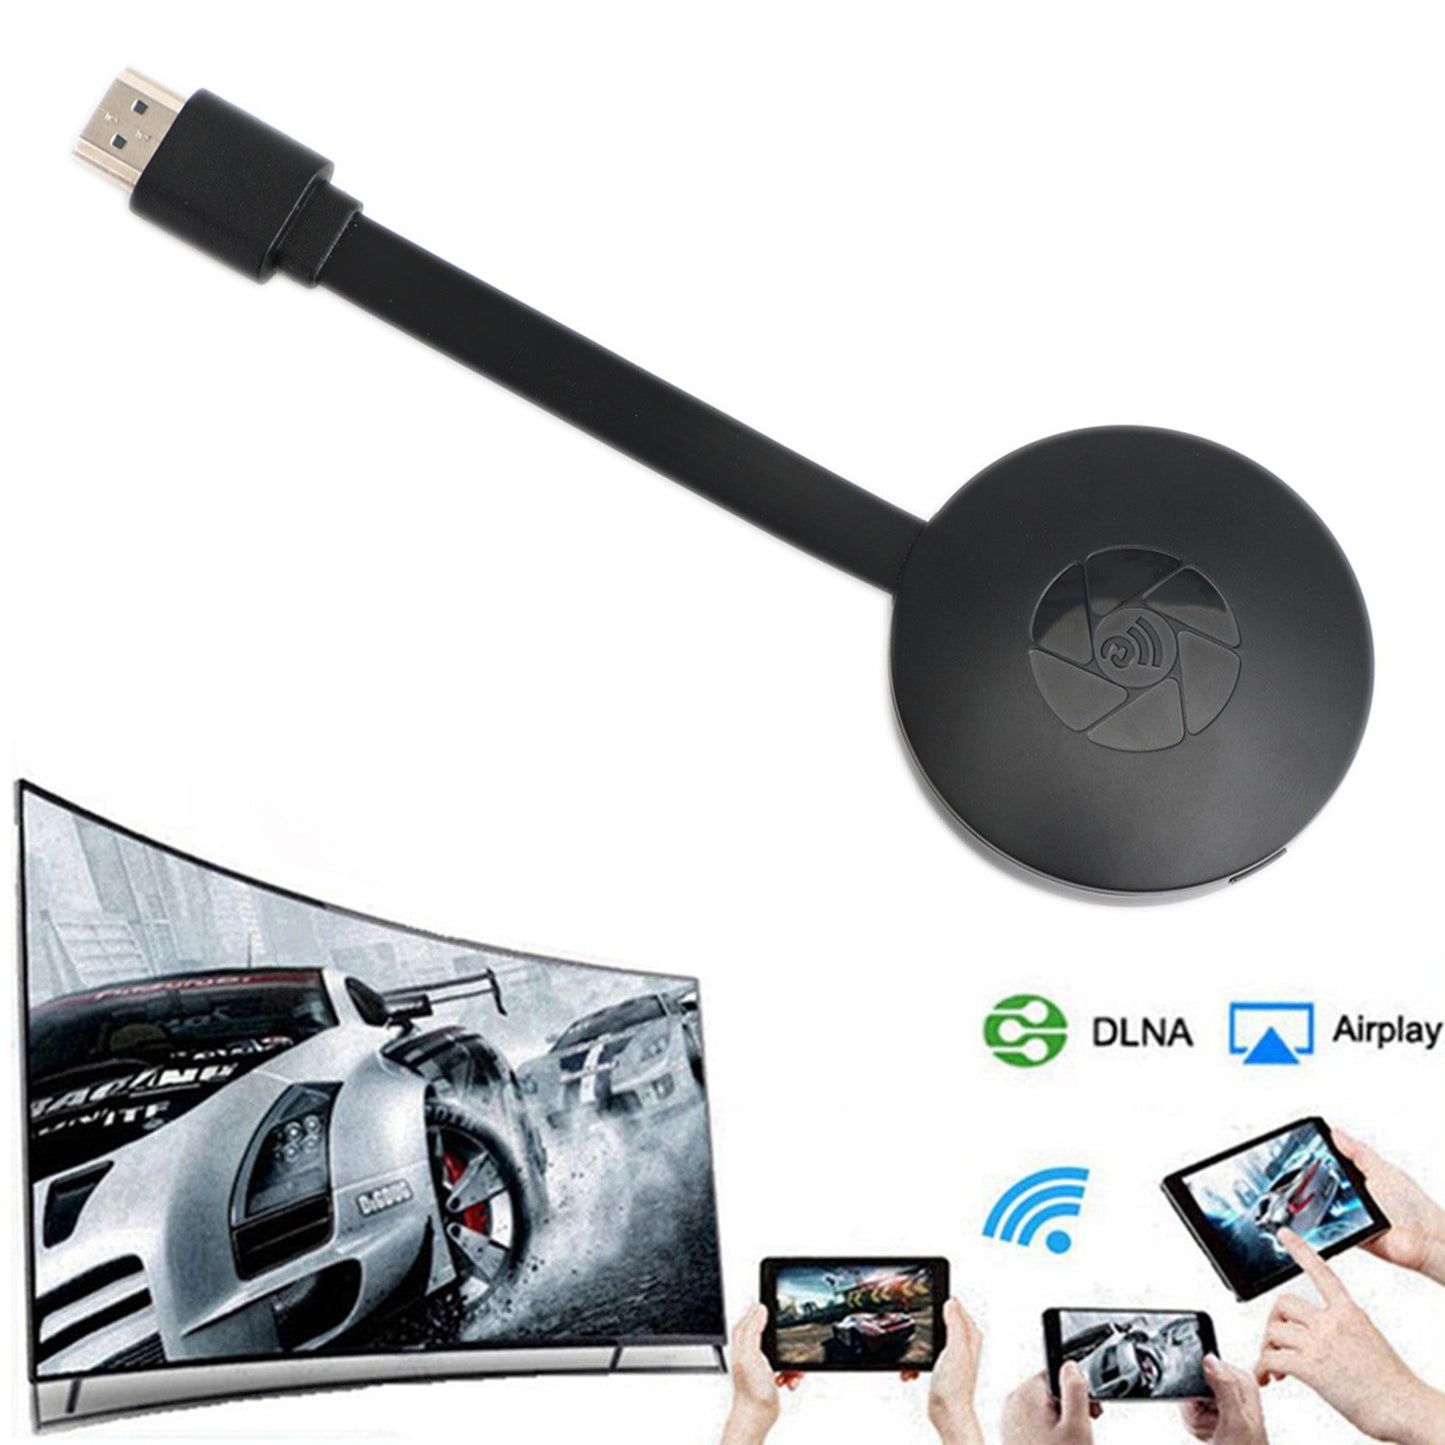 4K 1080P Wireless WiFi Display Dongle TV Stick HDMI G2 Adapter For IOS Android